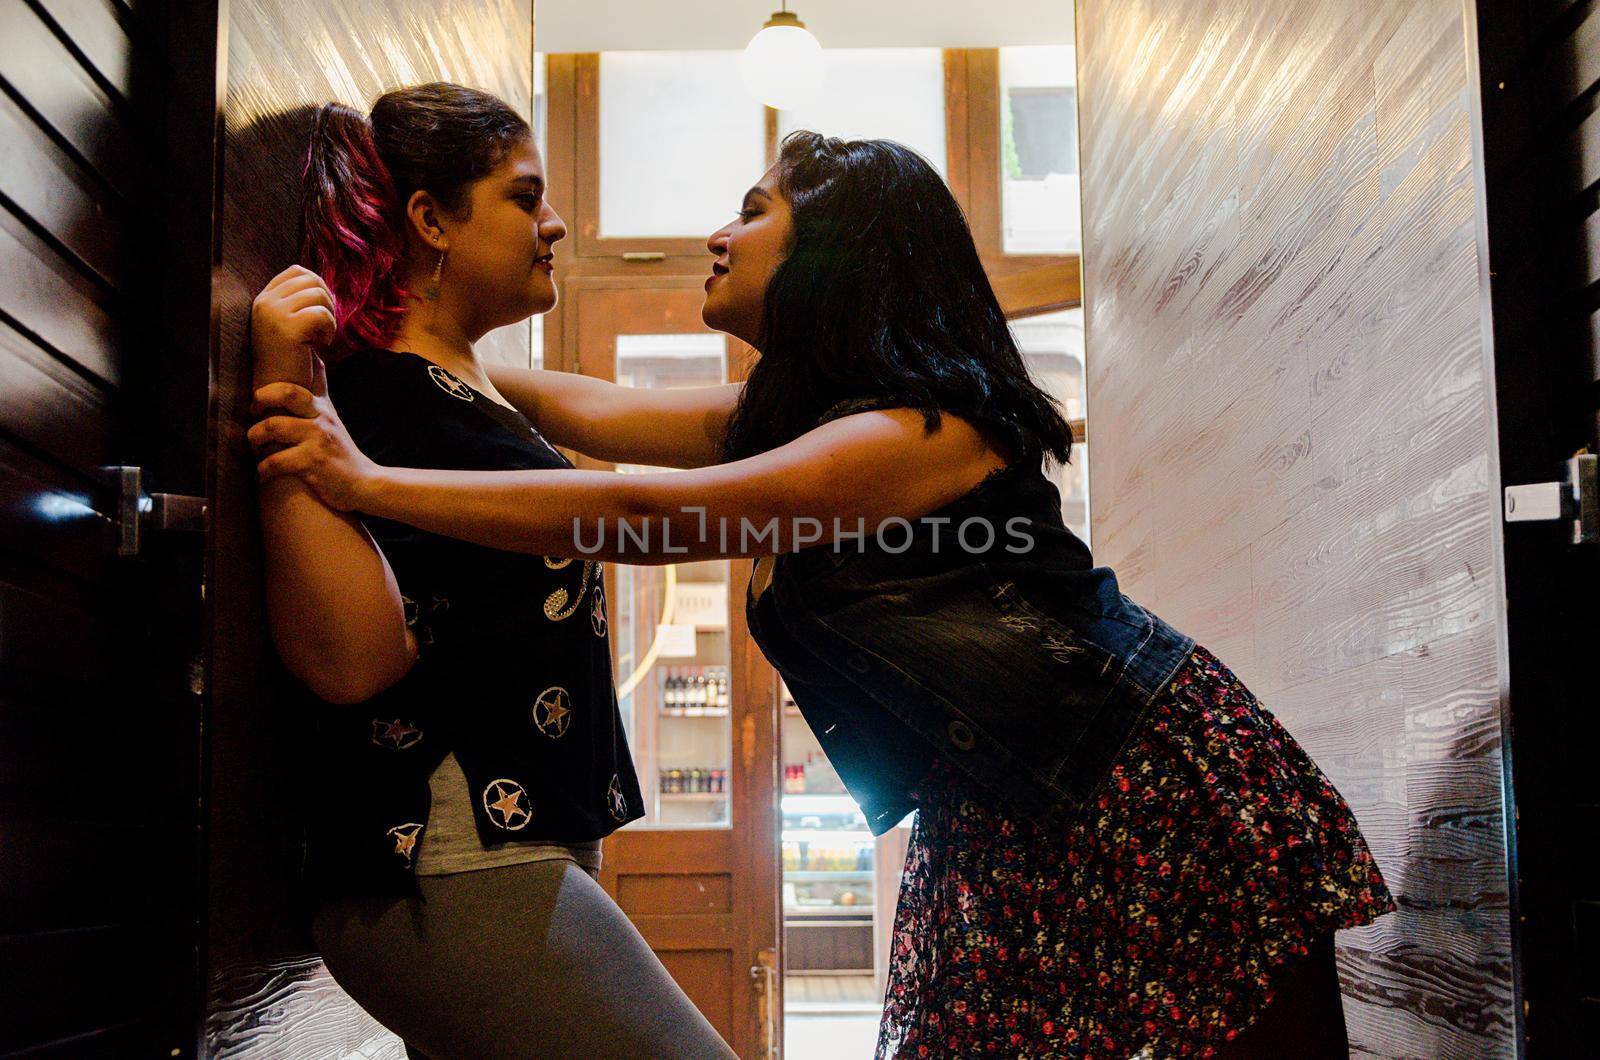 Two lesbian women stroking each other strongly, concept of love between people of the same sex by Peruphotoart